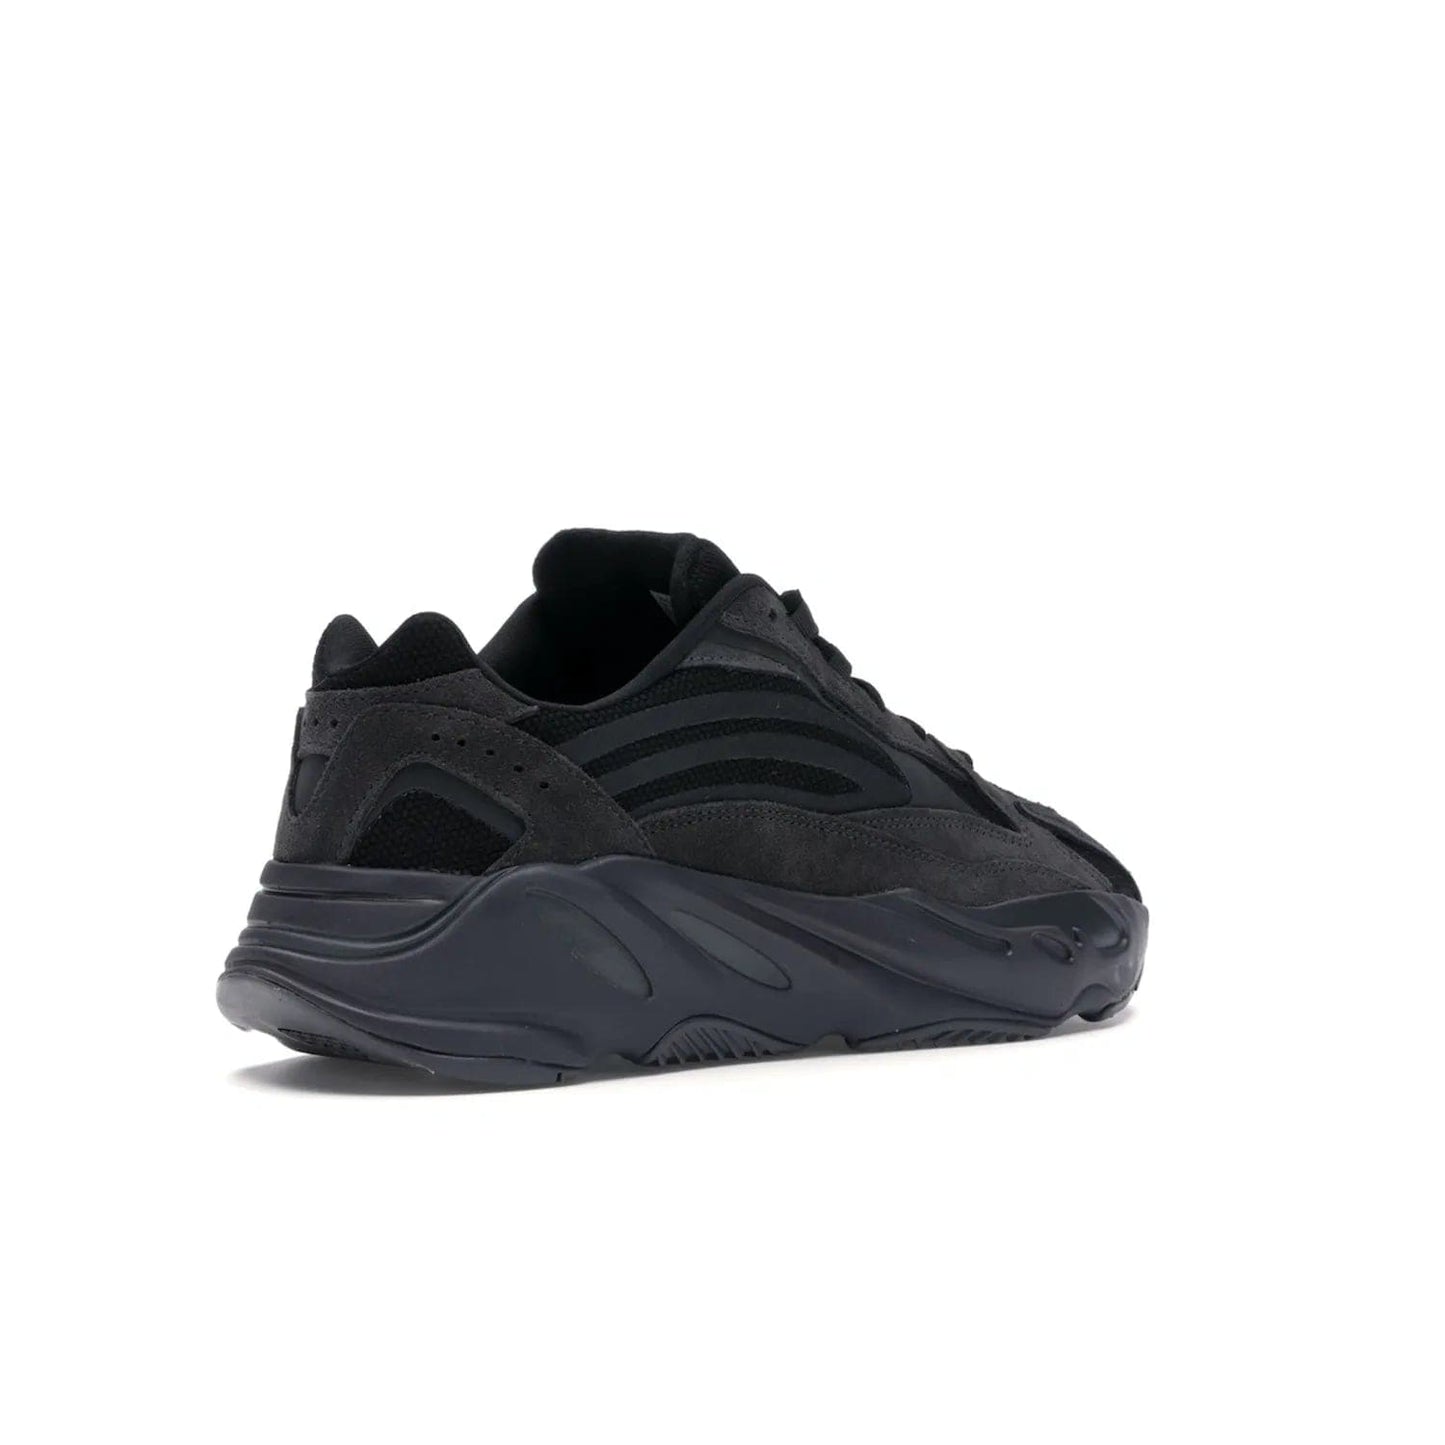 adidas Yeezy Boost 700 V2 Vanta - Image 33 - Only at www.BallersClubKickz.com - Introducing the adidas Yeezy Boost 700 V2 Vanta - a sleek and stylish all-black design featuring a combination of mesh, leather, and suede construction with signature Boost cushioning in the sole. The ultimate in comfort and support.